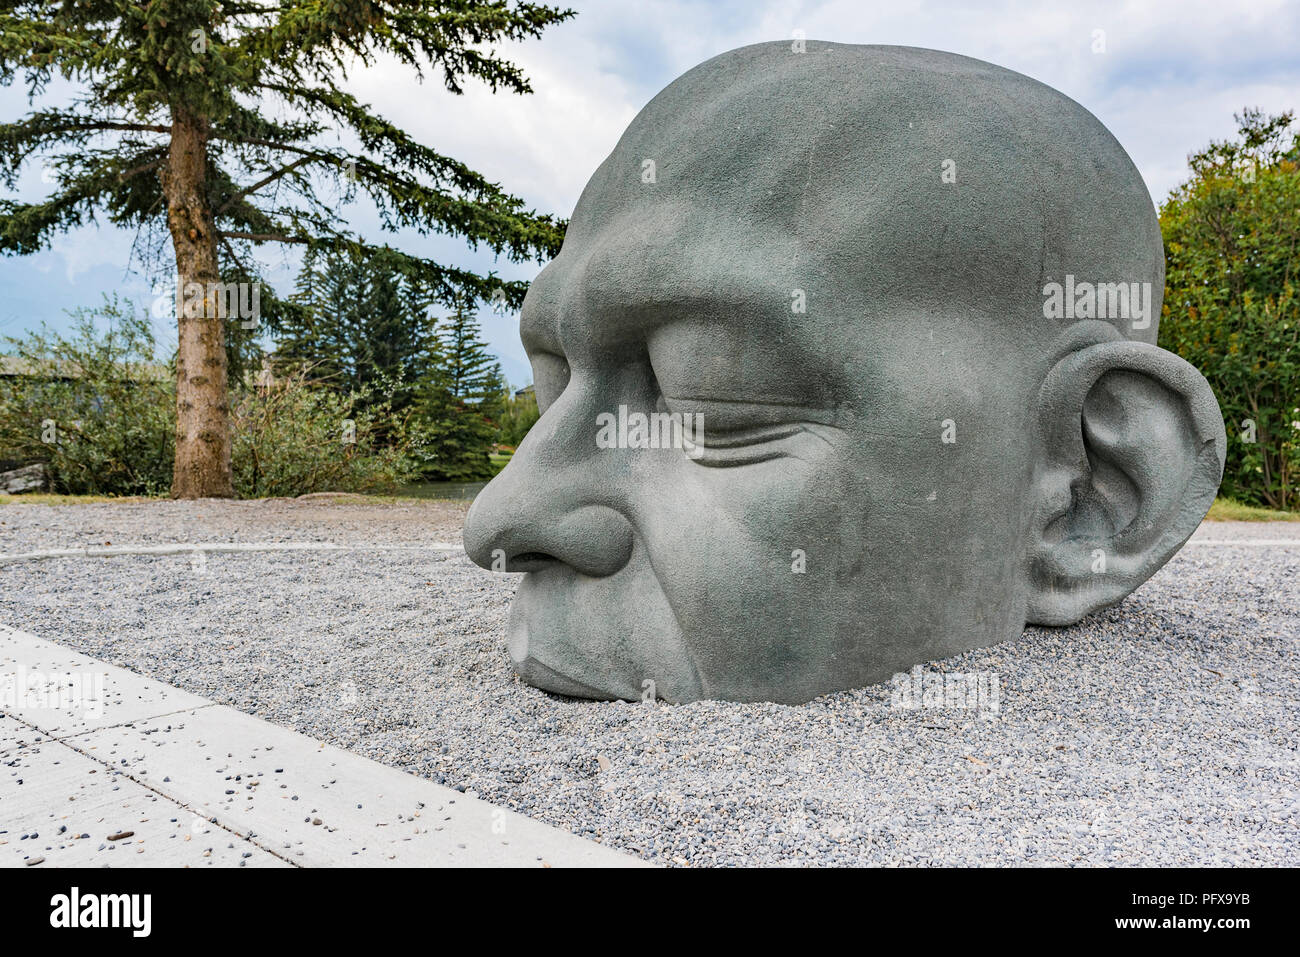 Sculpture named Big Head, a translation of the Gaelic Ceann Mór, a variation of the town's name., Canmore, Alberta, Canada. Stock Photo